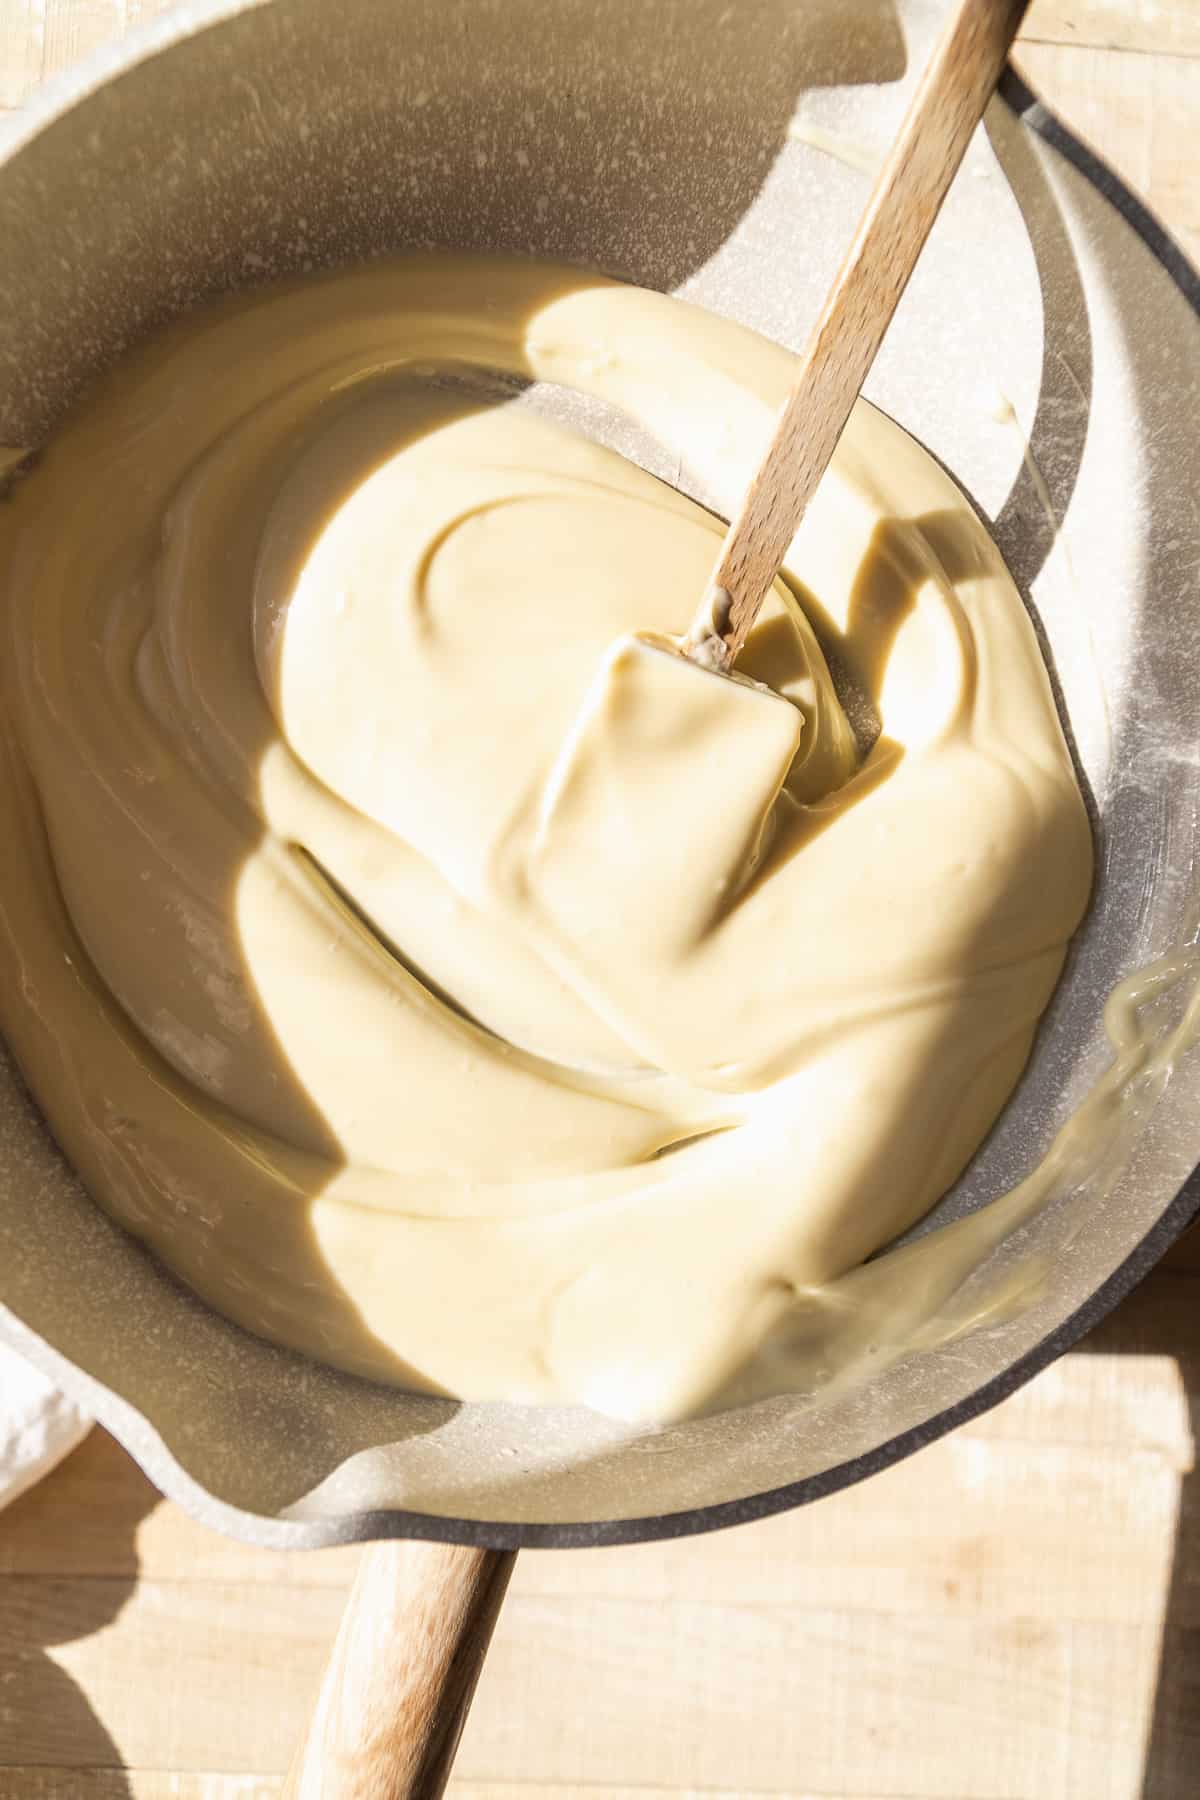 White chocolate melted in a skillet.